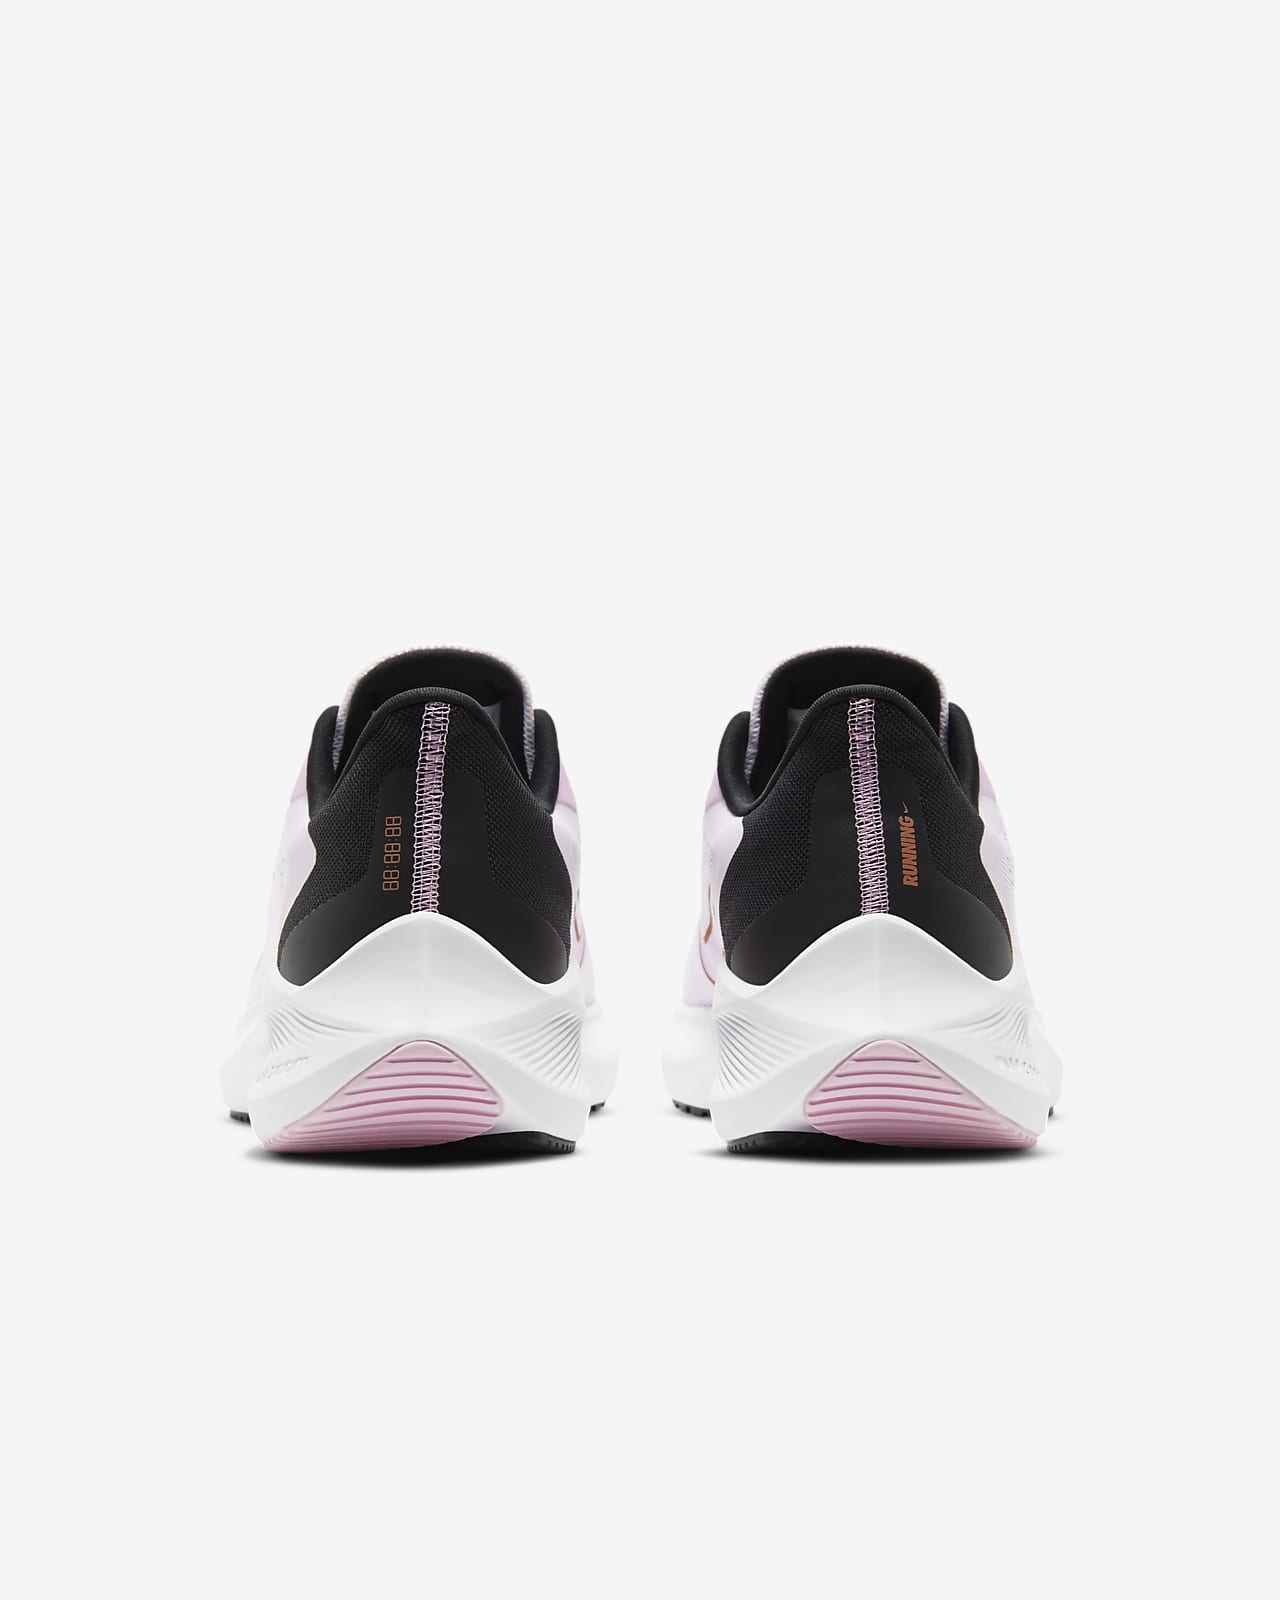 nike air zoom winflo 7 women's review